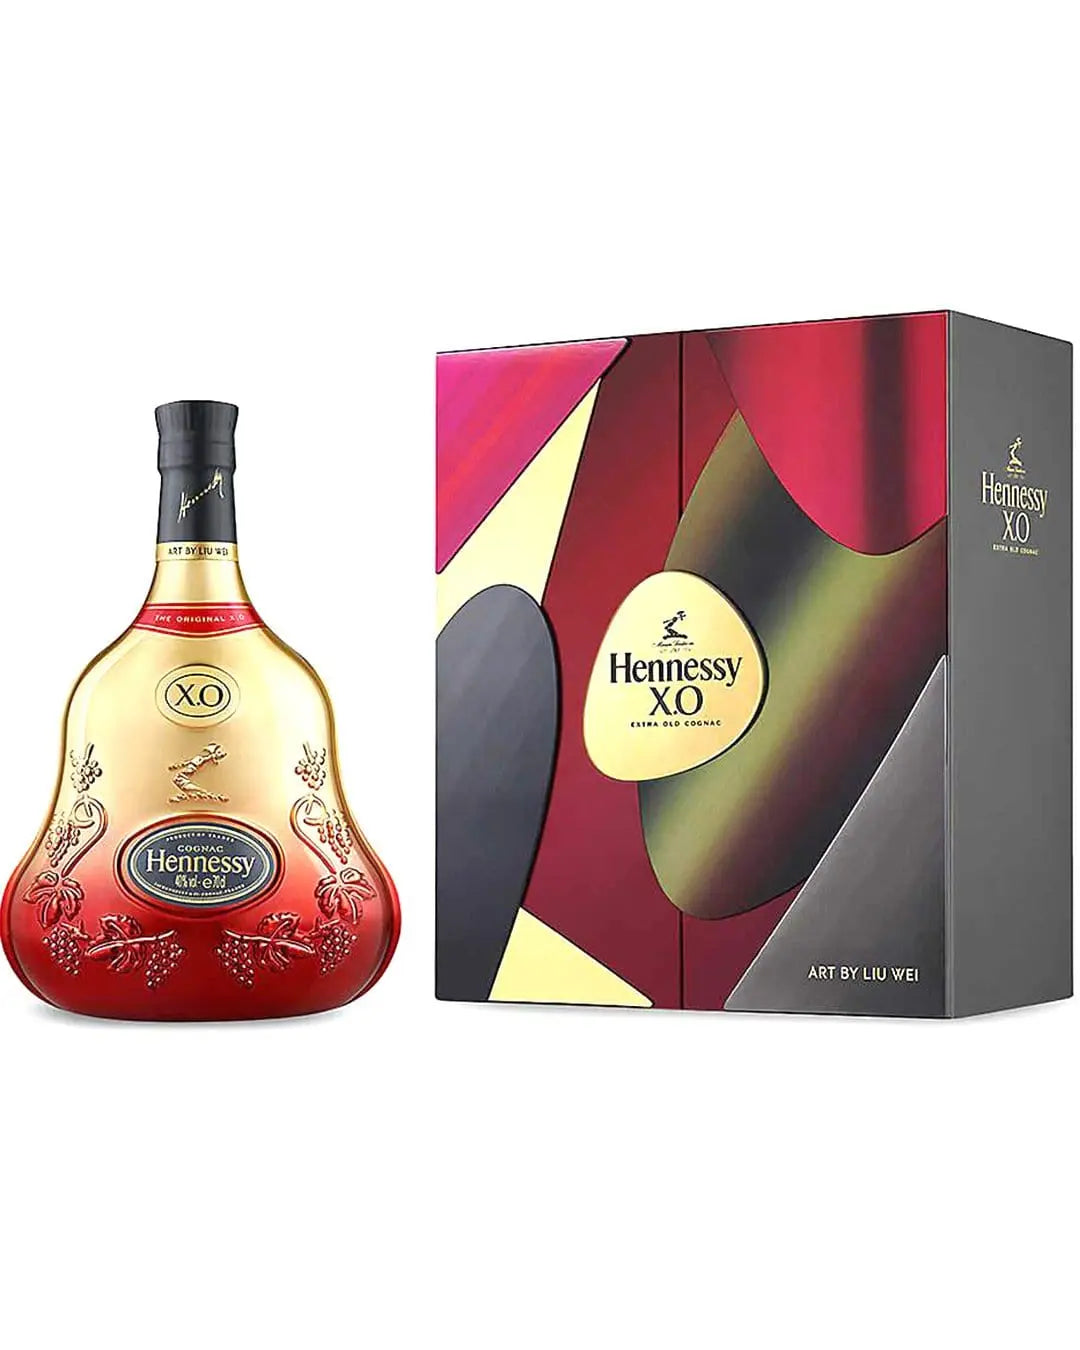 Hennessy X.O Deluxe Limited Edition LNY Cognac, 70 cl Cognac & Brandy